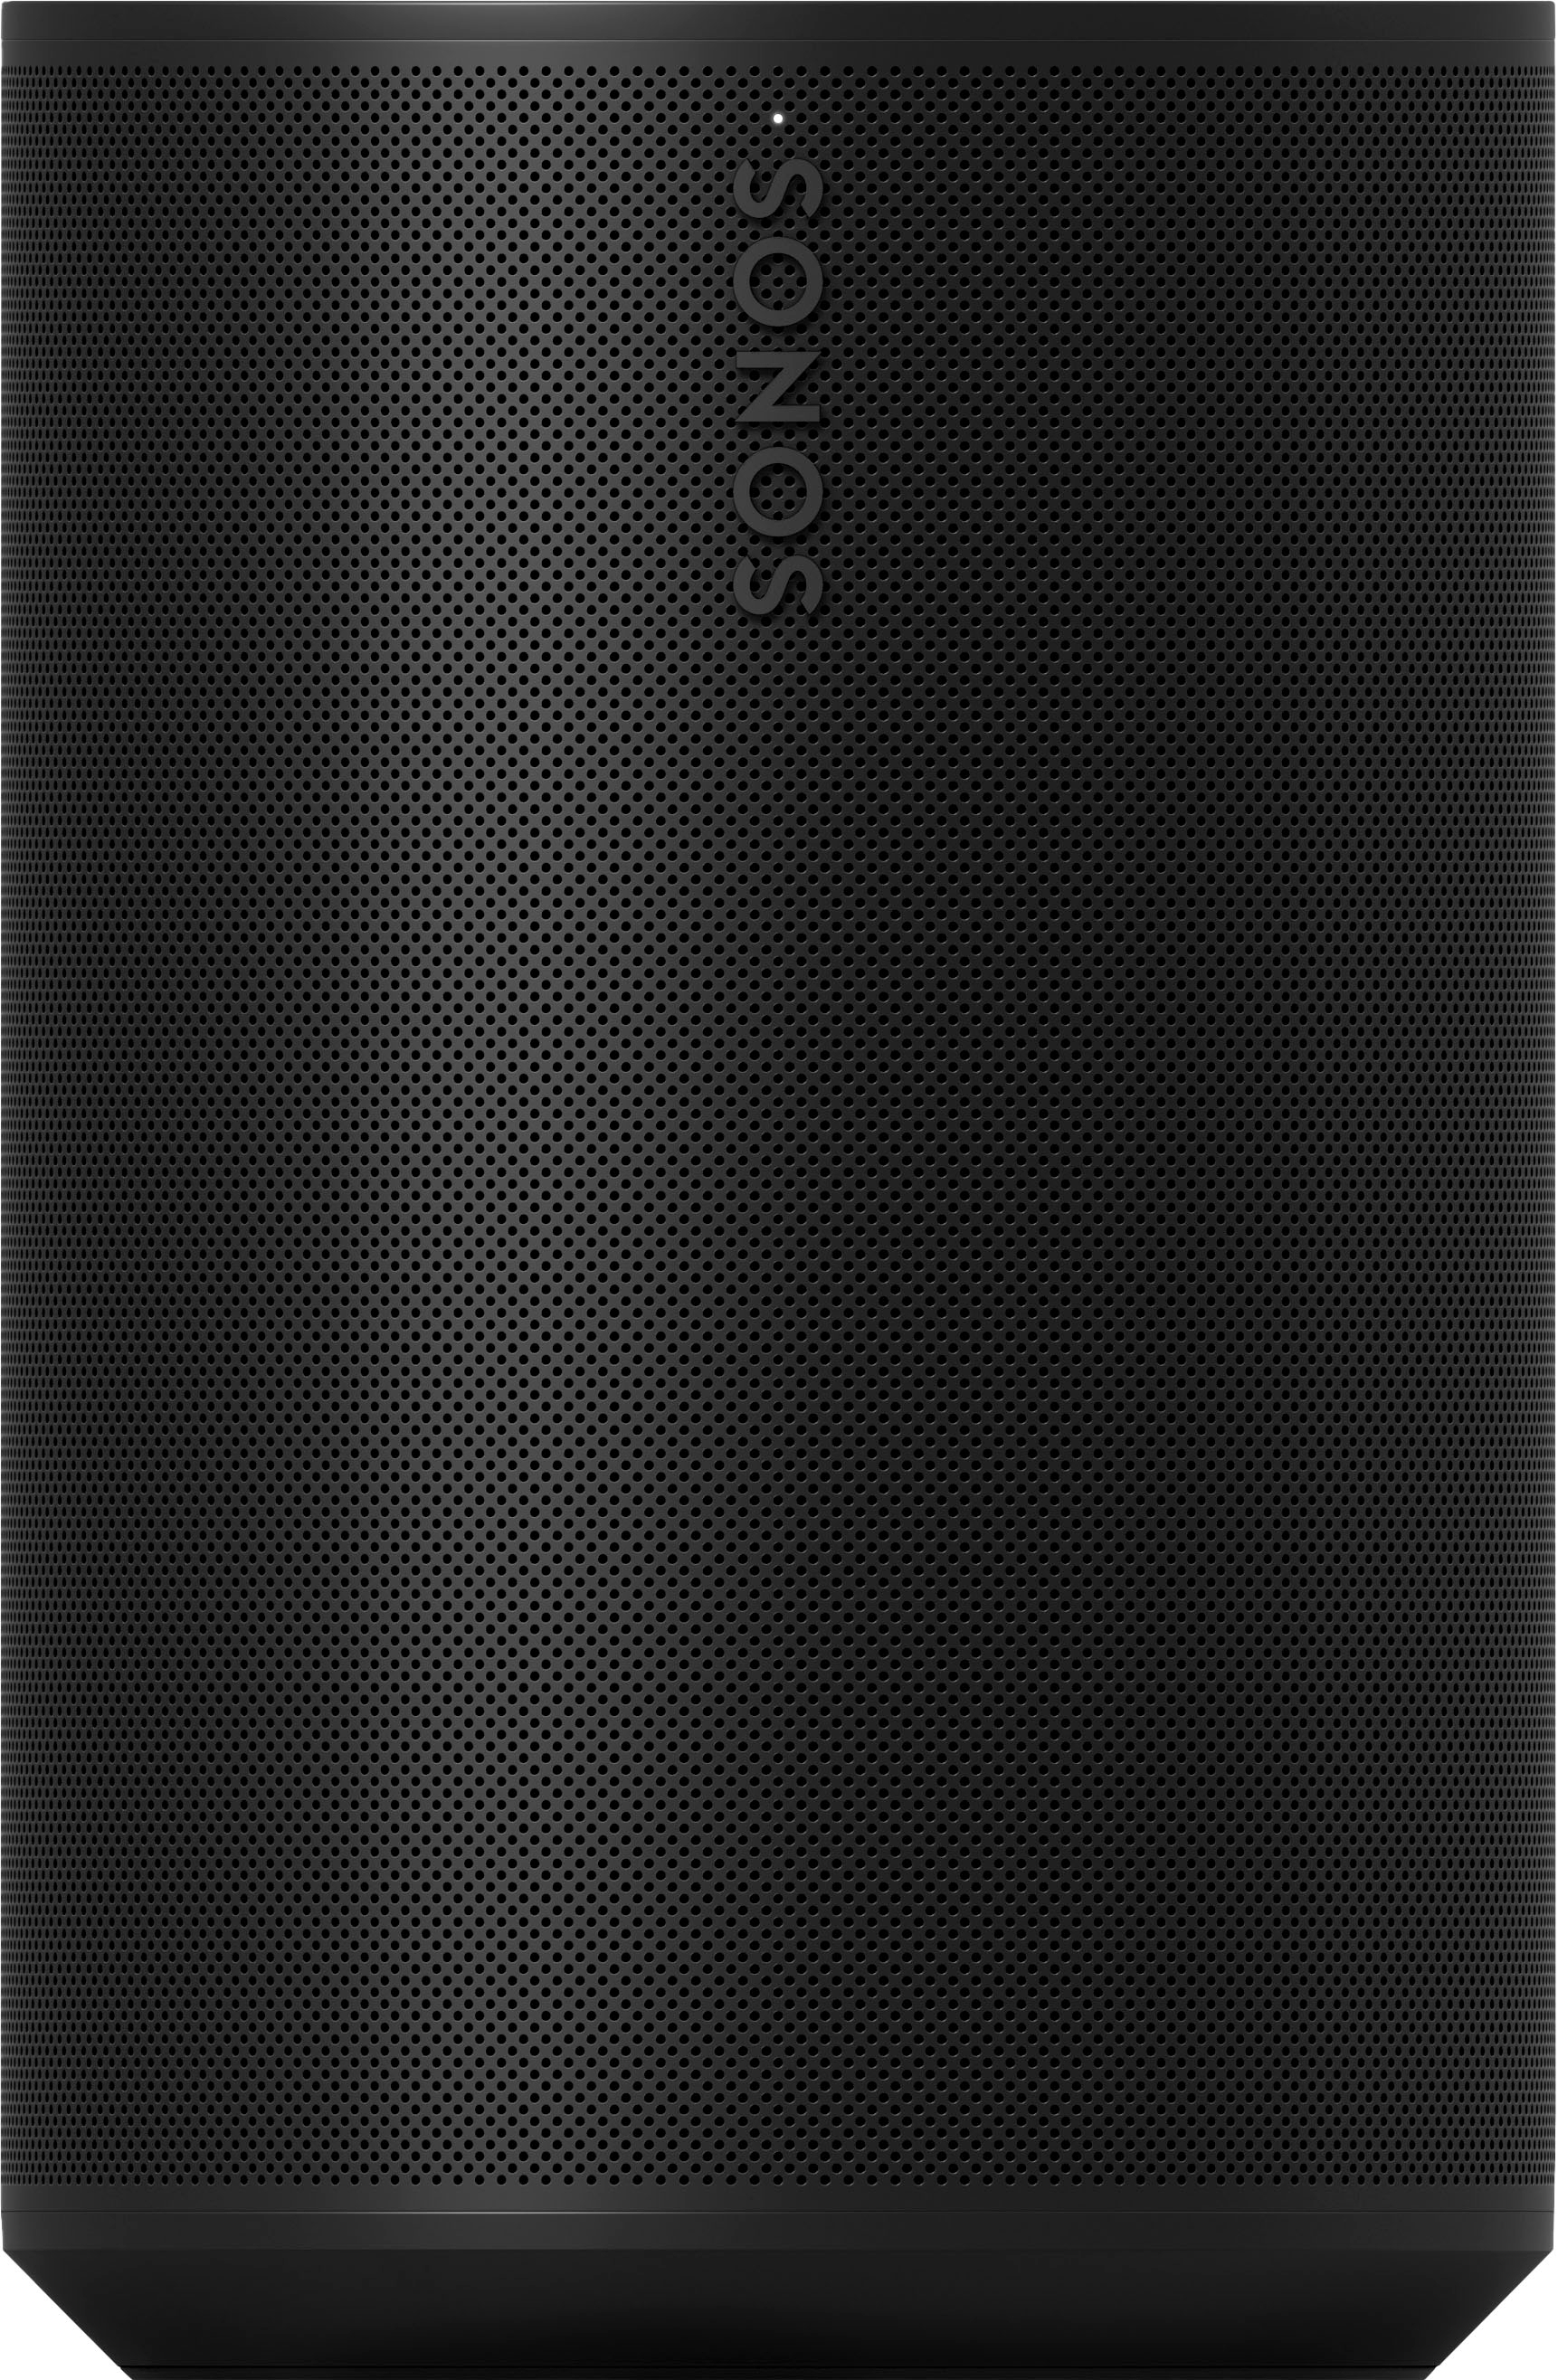 Sonos Era 100 Voice-Controlled Wireless Smart Speaker with Bluetooth,  Trueplay Acoustic Tuning Technology, & Voice Control Built-In (Black) 